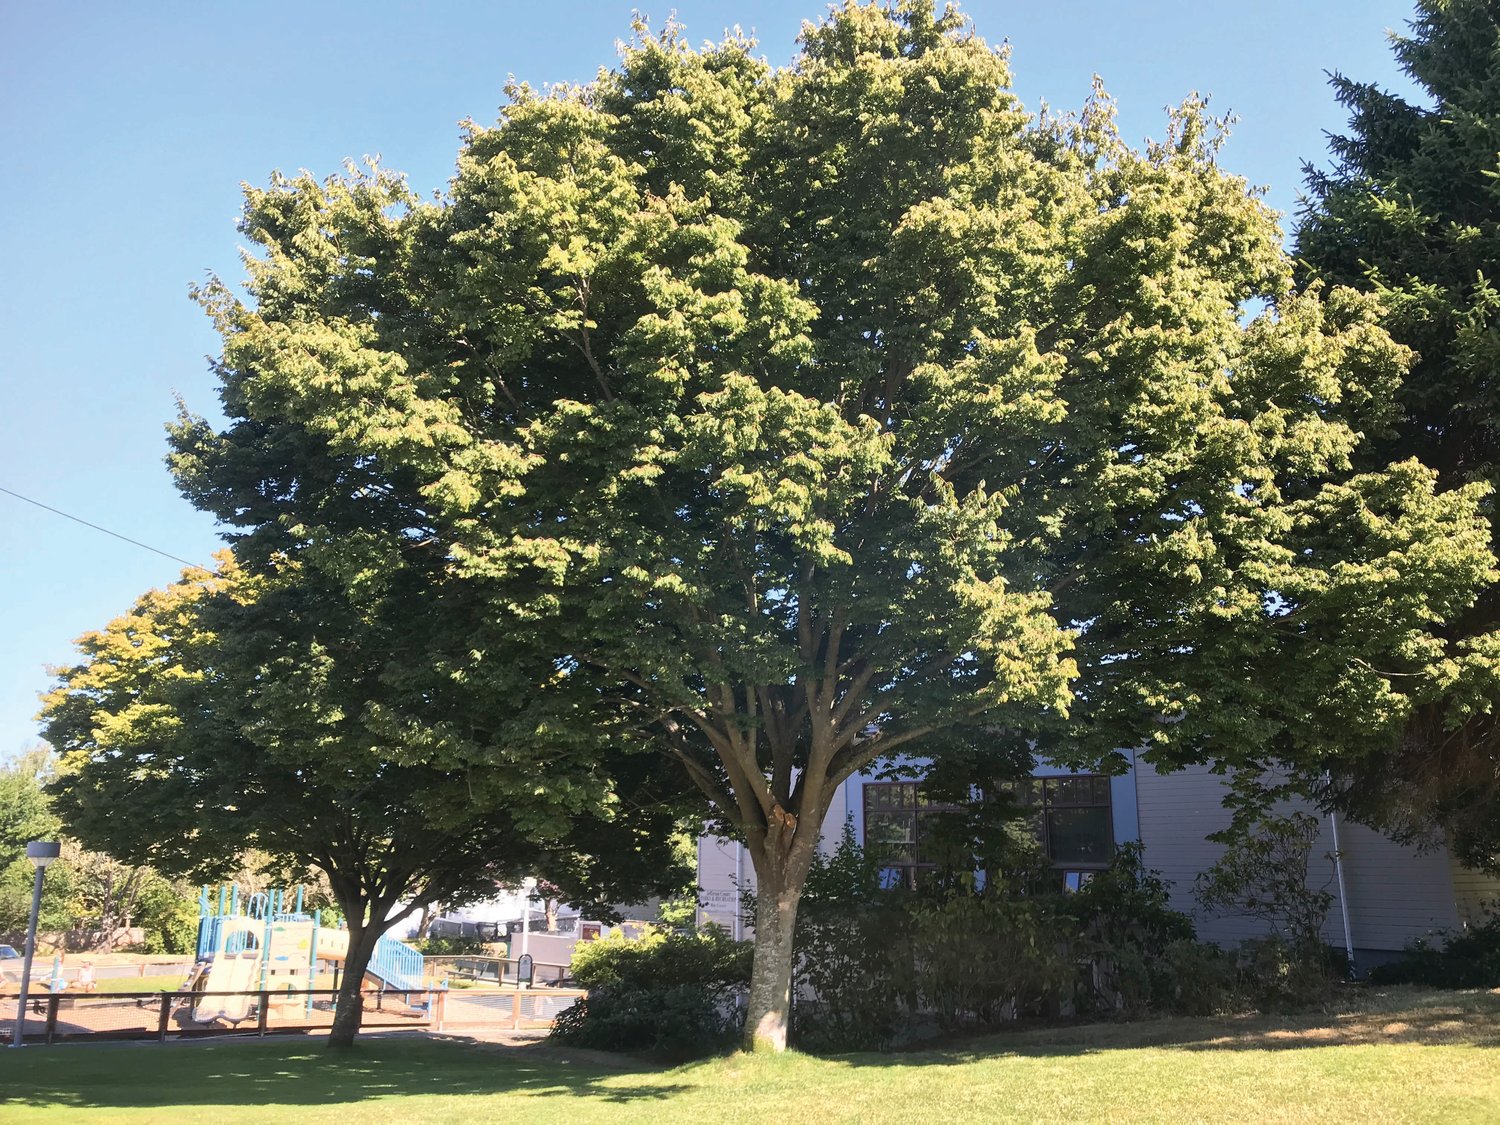 Two Zelkova trees offer aesthetic beauty and shade at the Port Townsend Community Center.